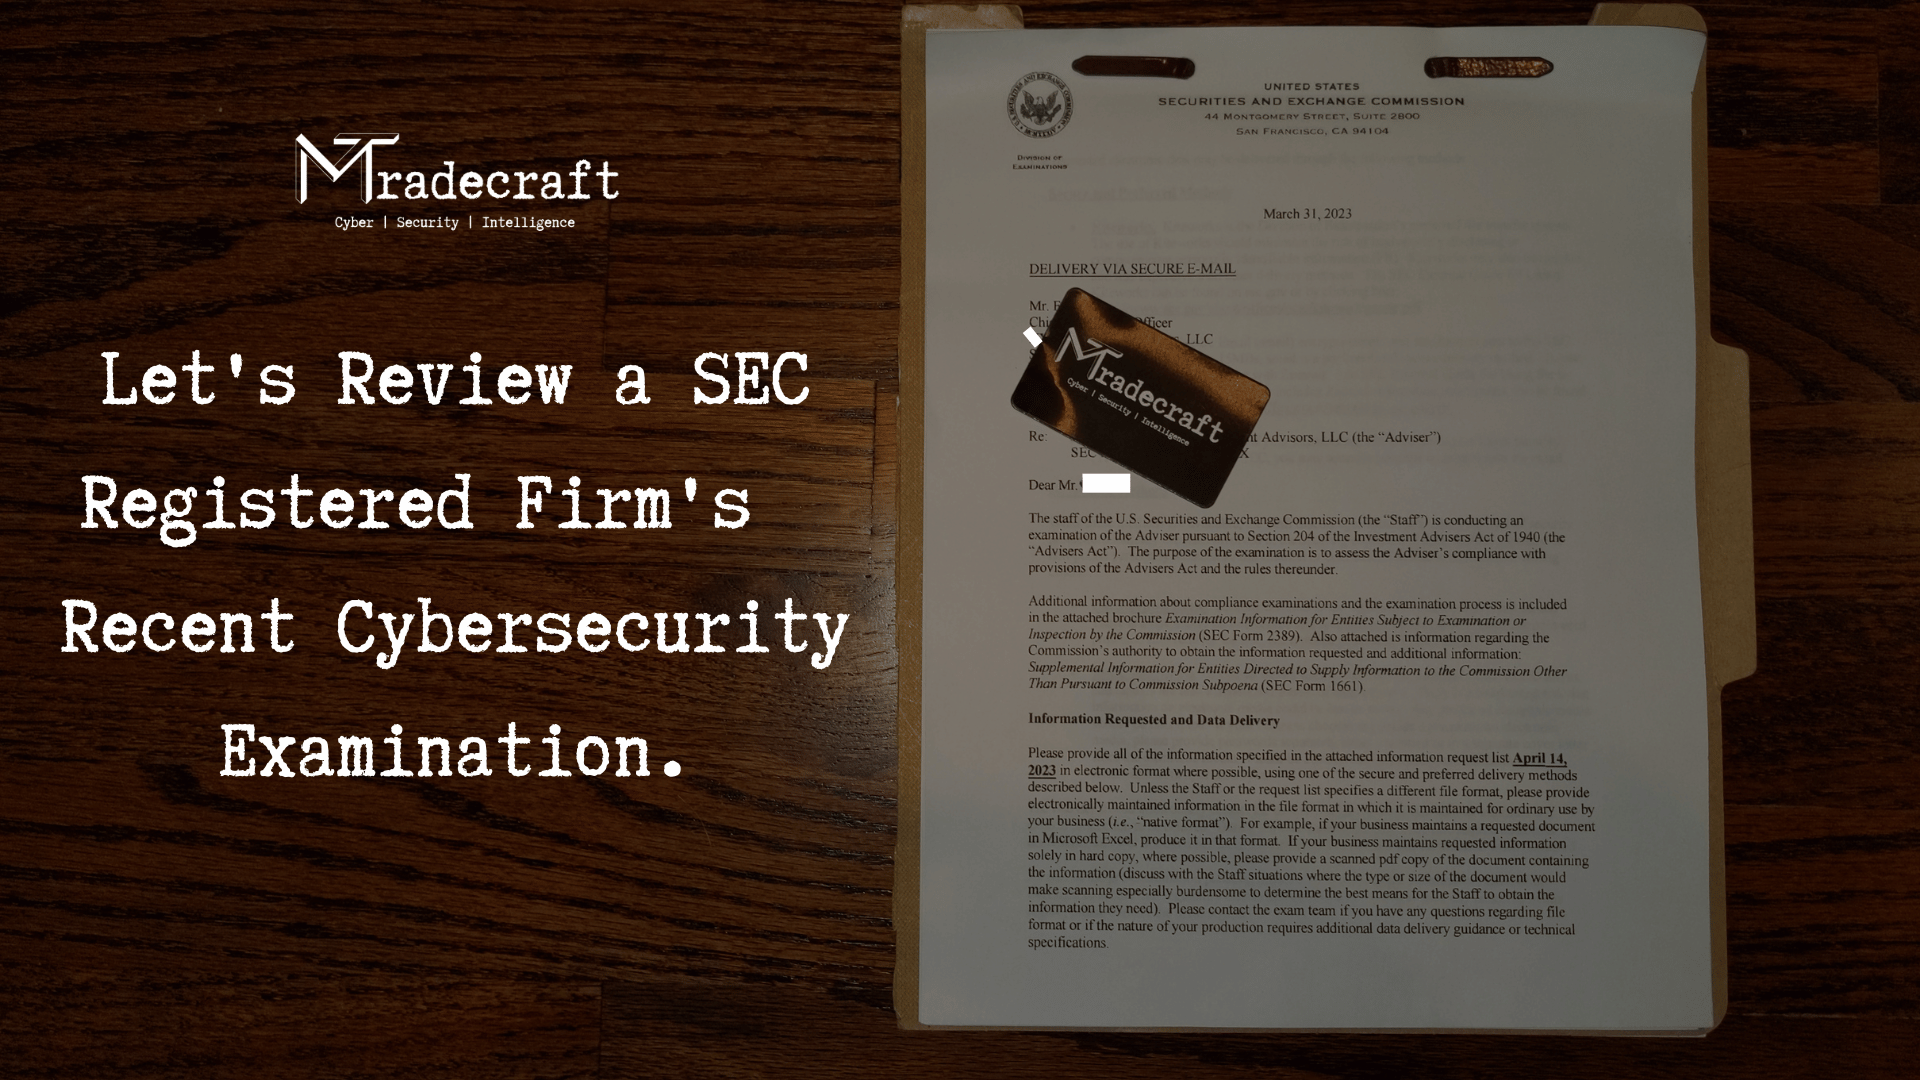 Reviewing a Cybersecurity Documentation Request List from the SEC